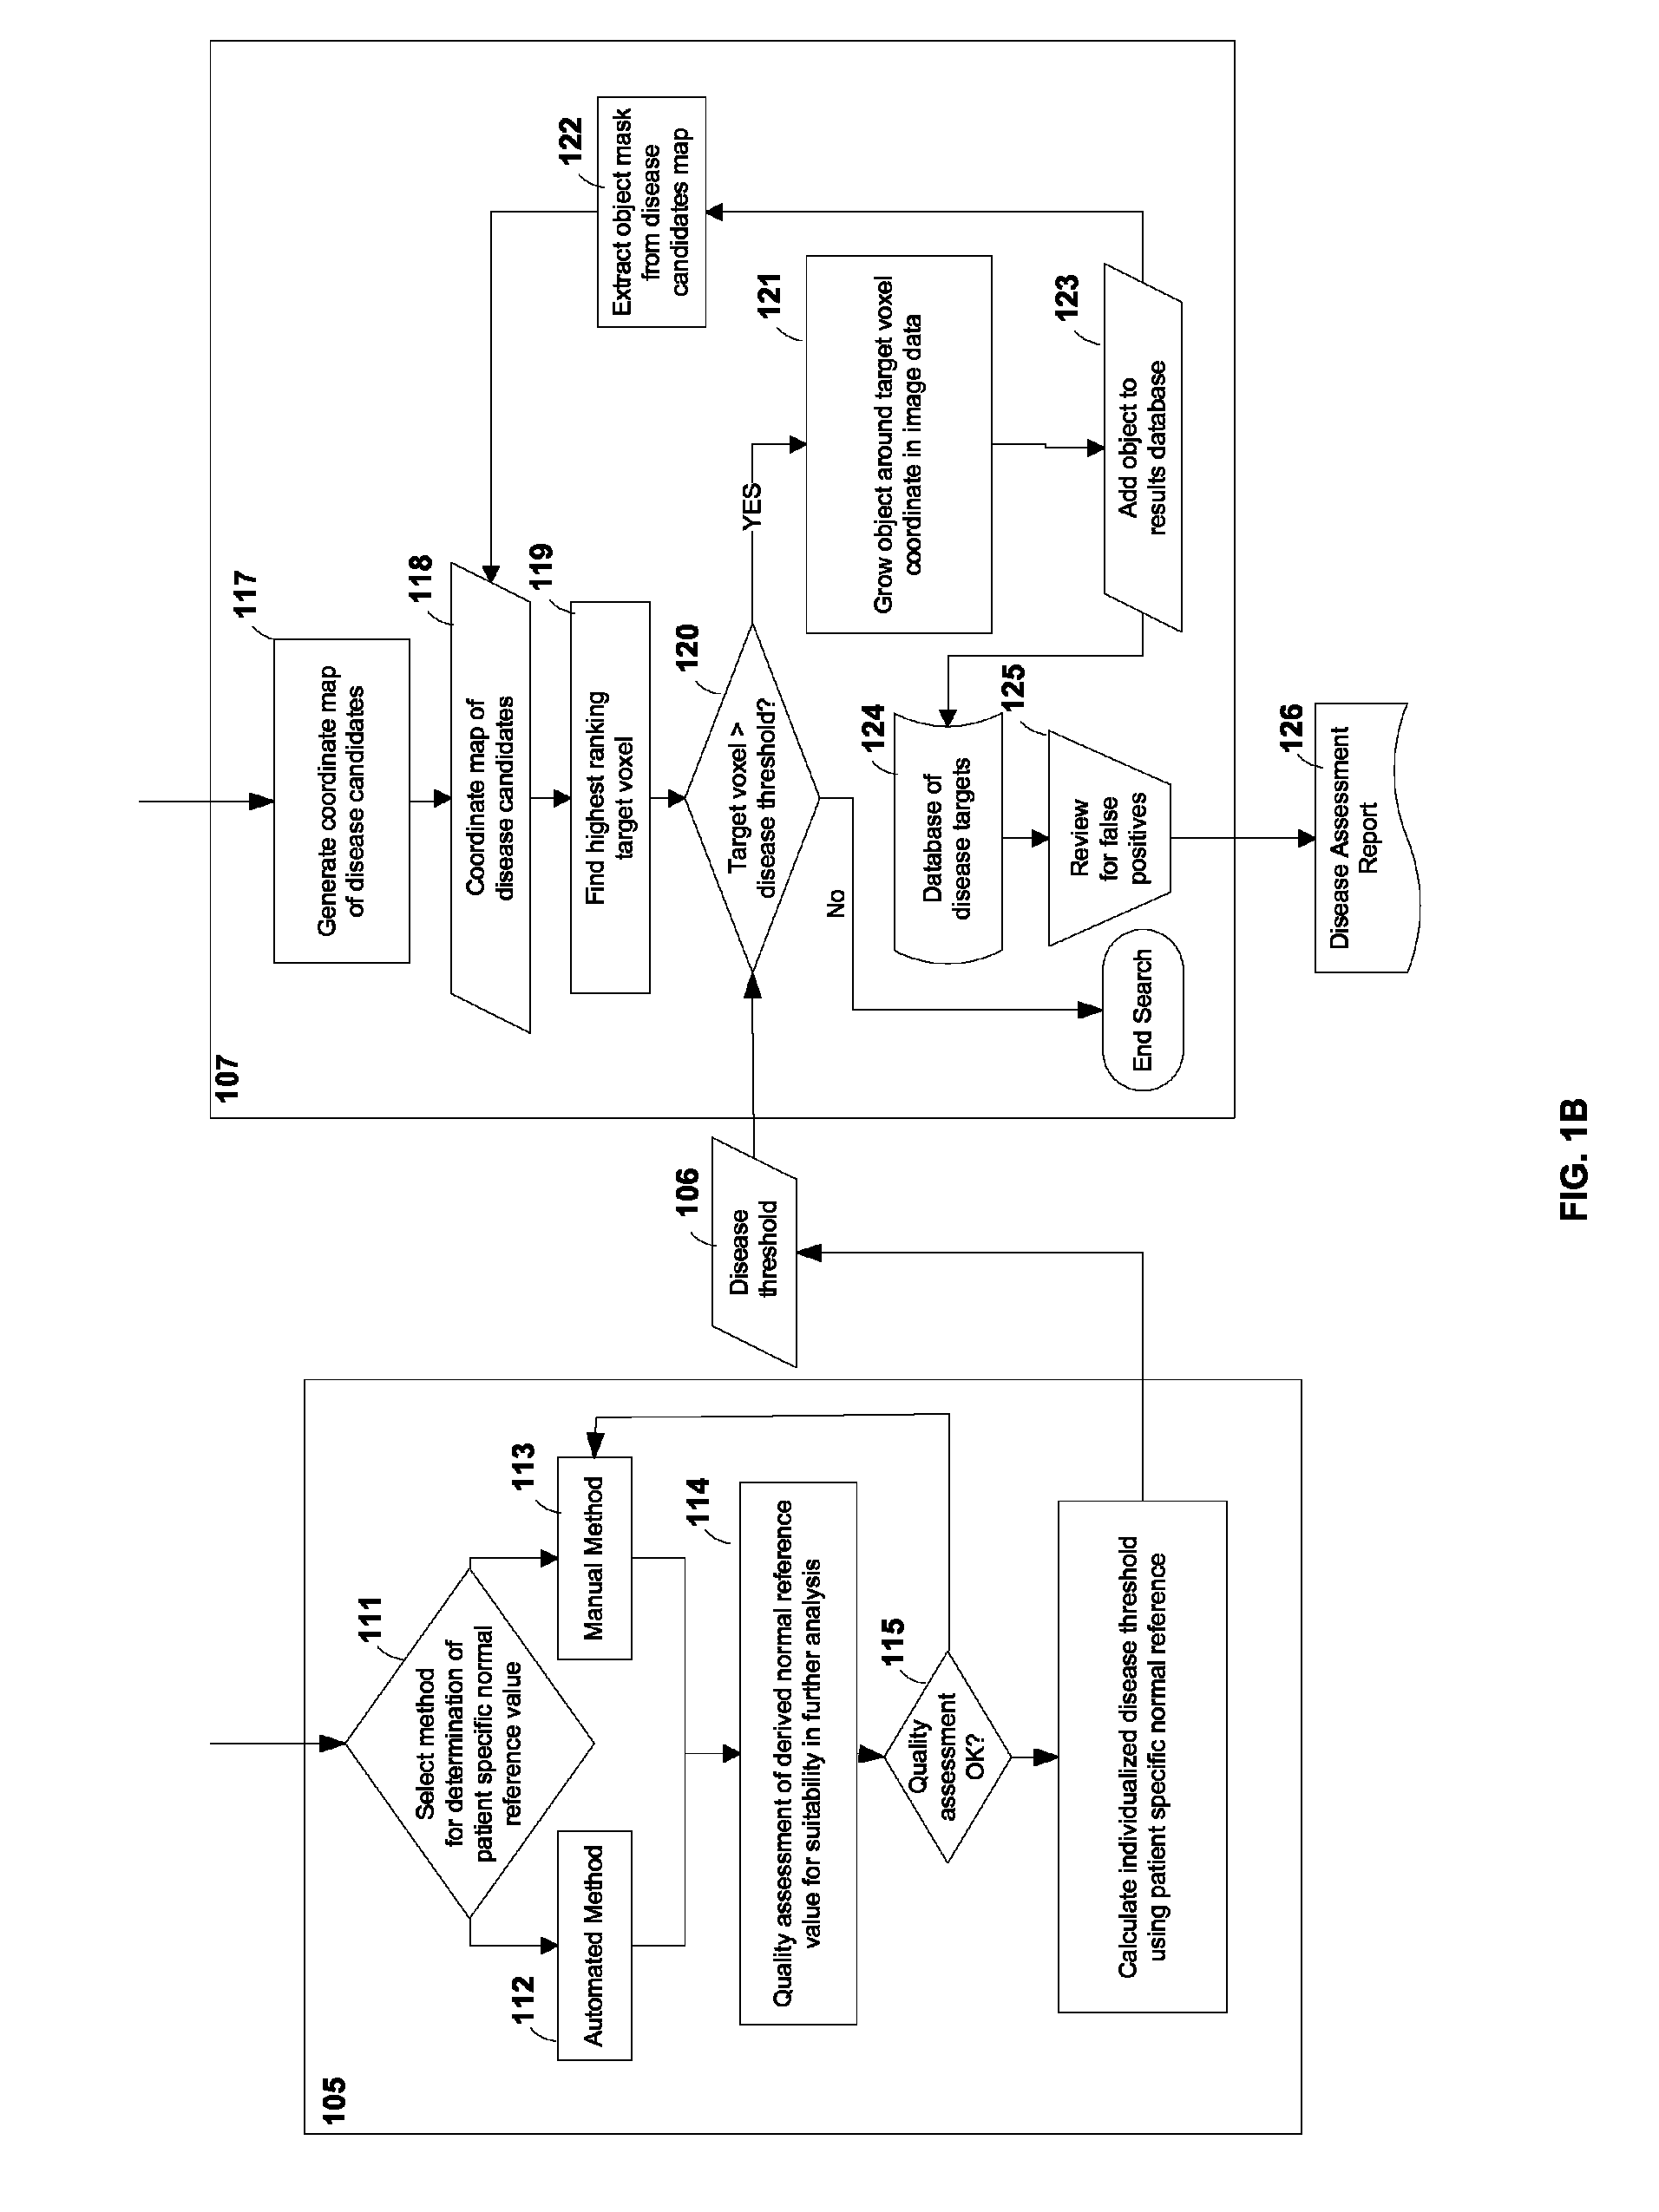 Computer-aided detection (CAD) system for personalized disease detection, assessment, and tracking, in medical imaging based on user selectable criteria